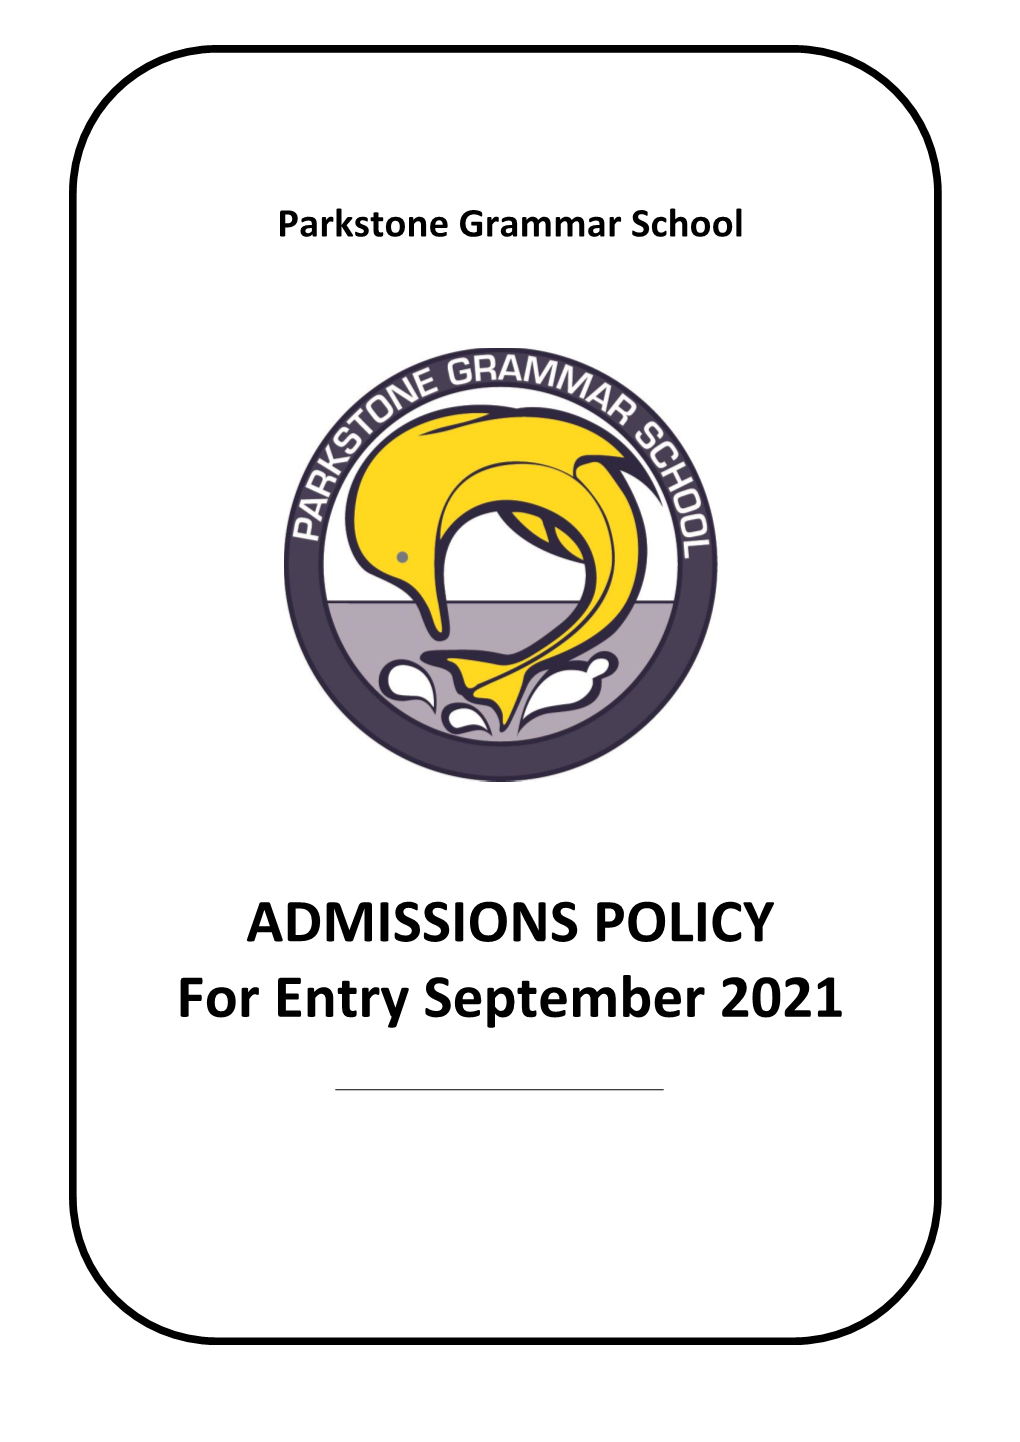 ADMISSIONS POLICY for Entry September 2021